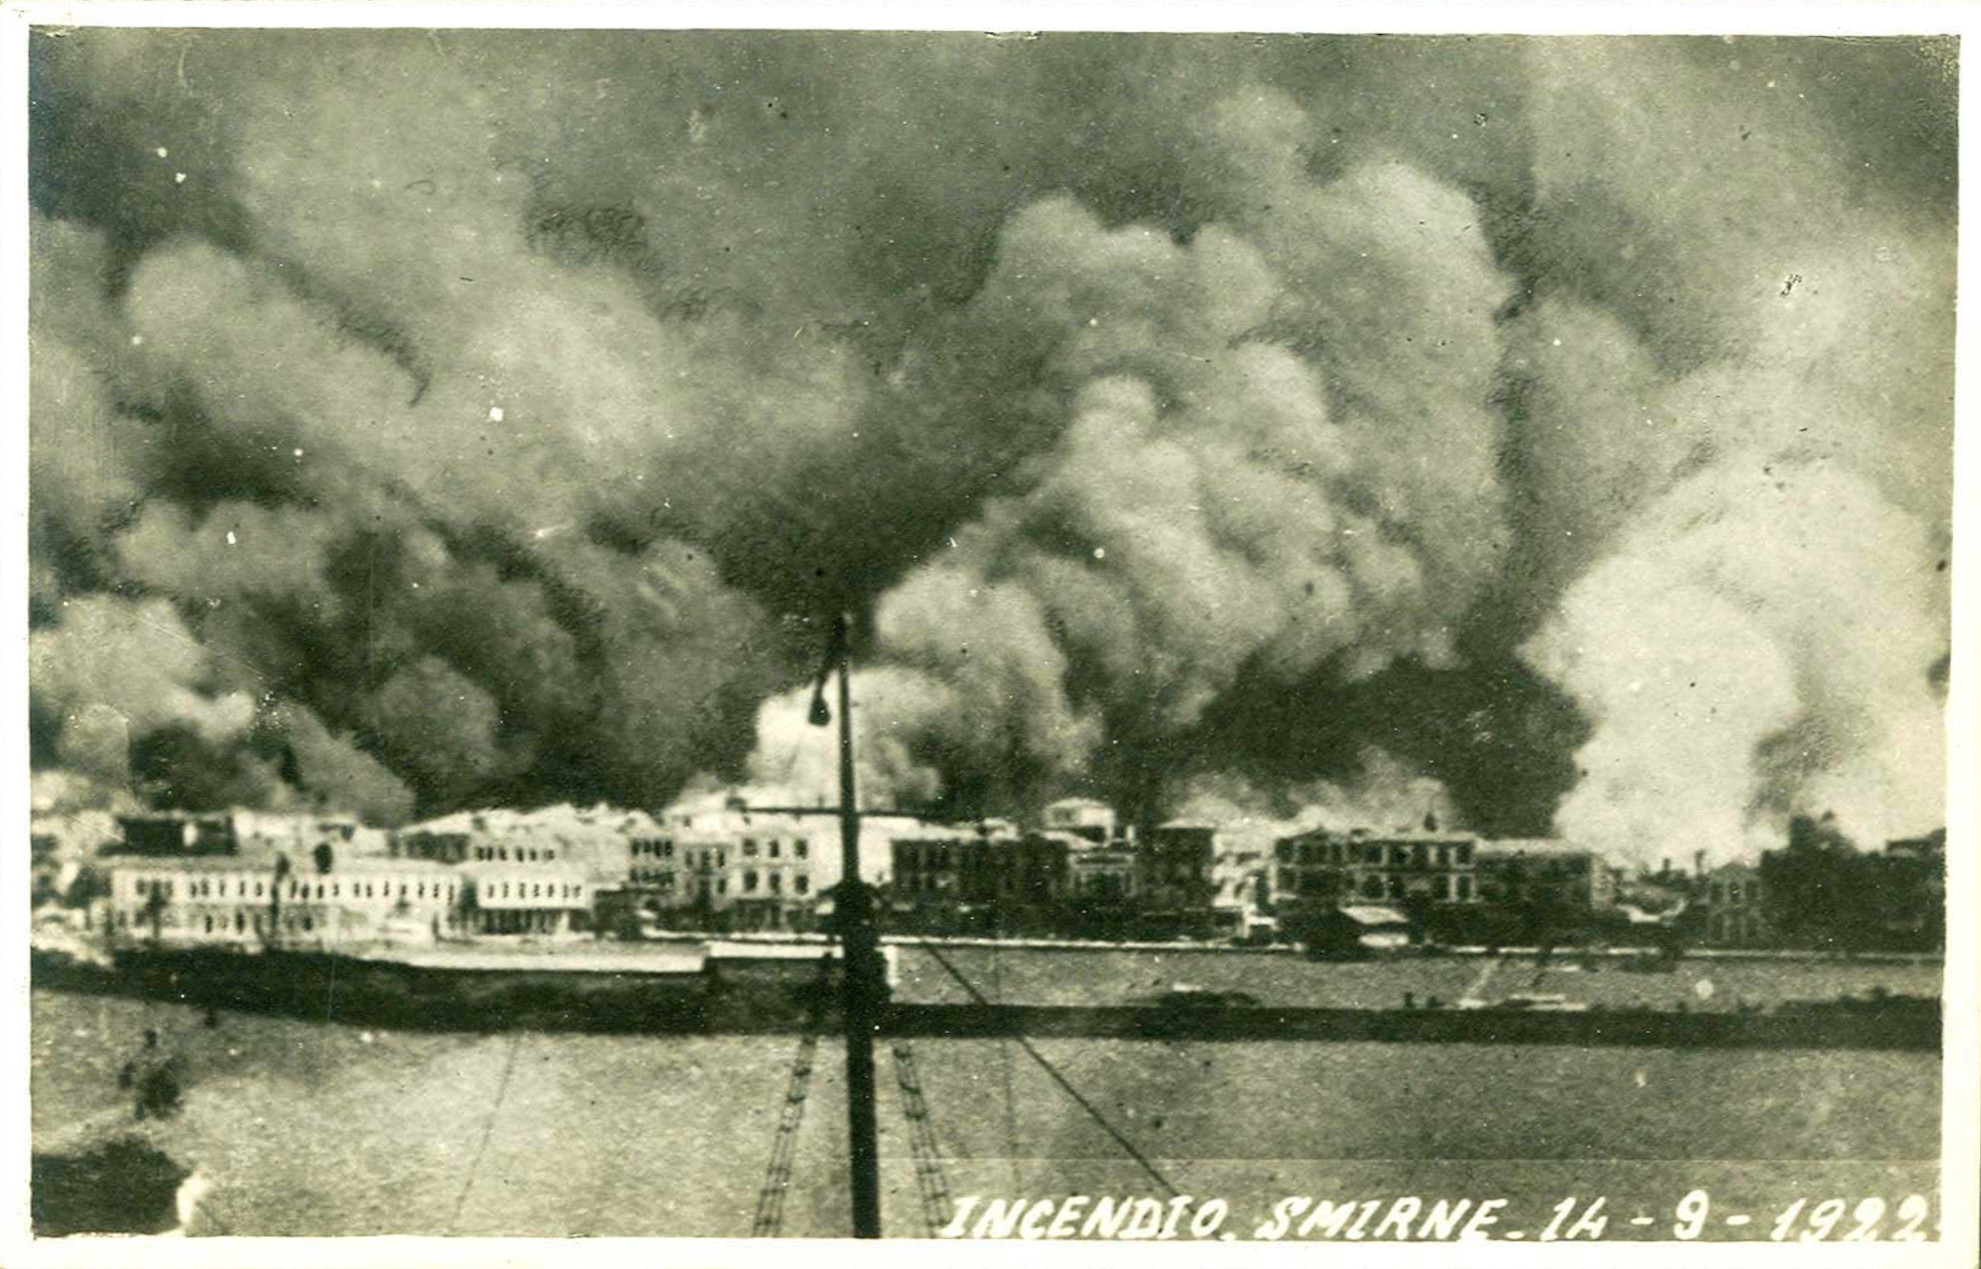 The Great Fire of Smyrna as seen from an Italian ship, 14 September 1922